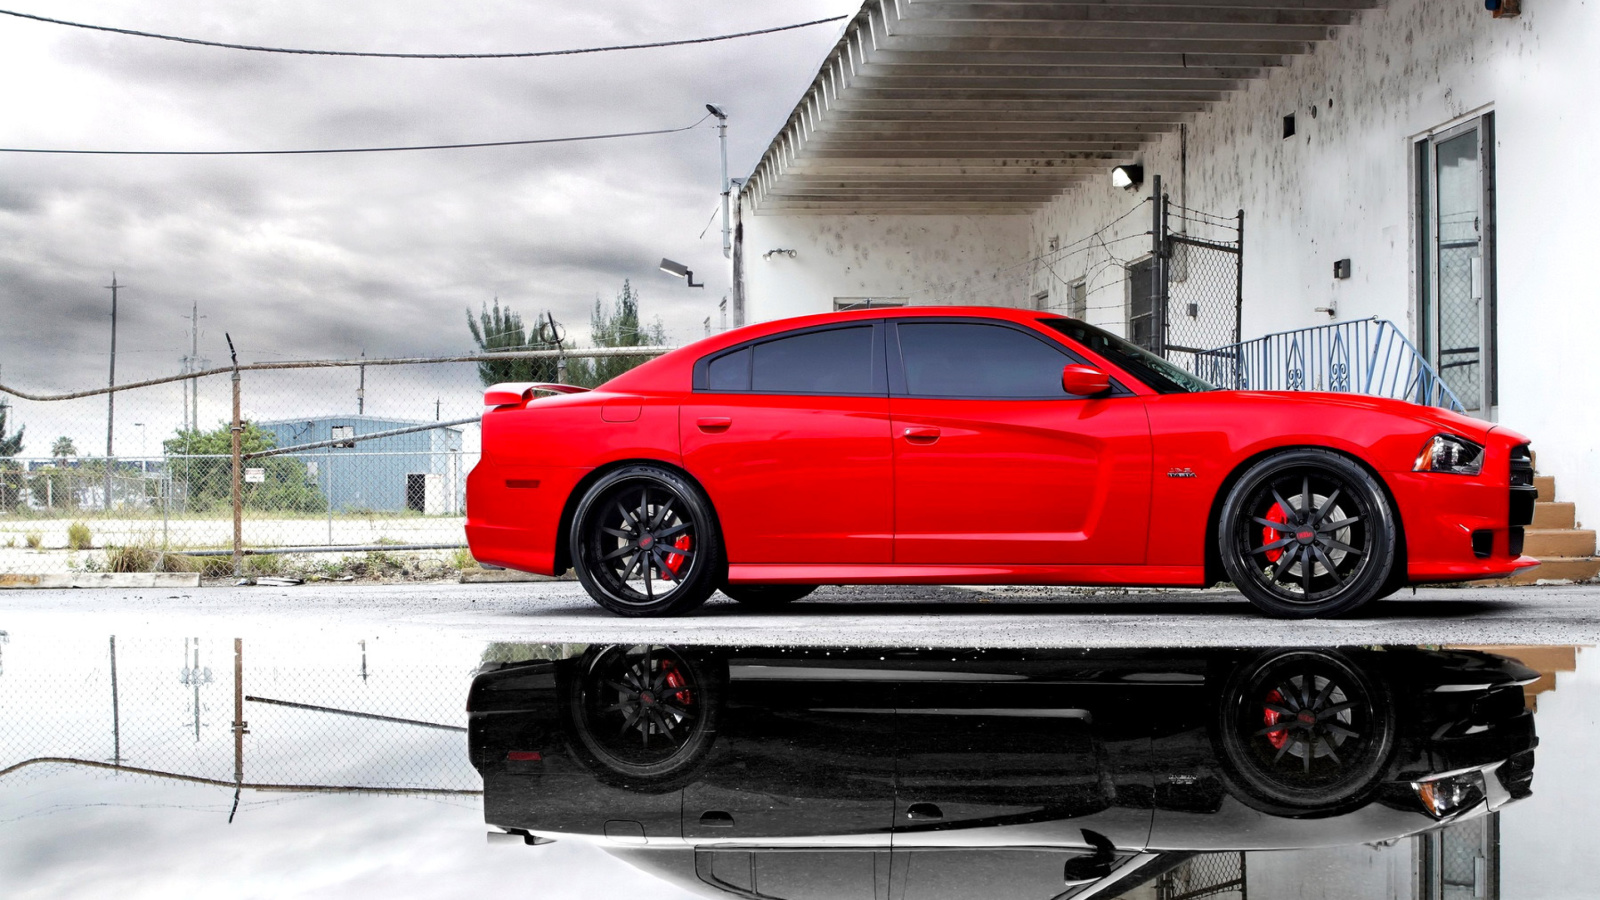 Dodge Charger wallpaper 1600x900